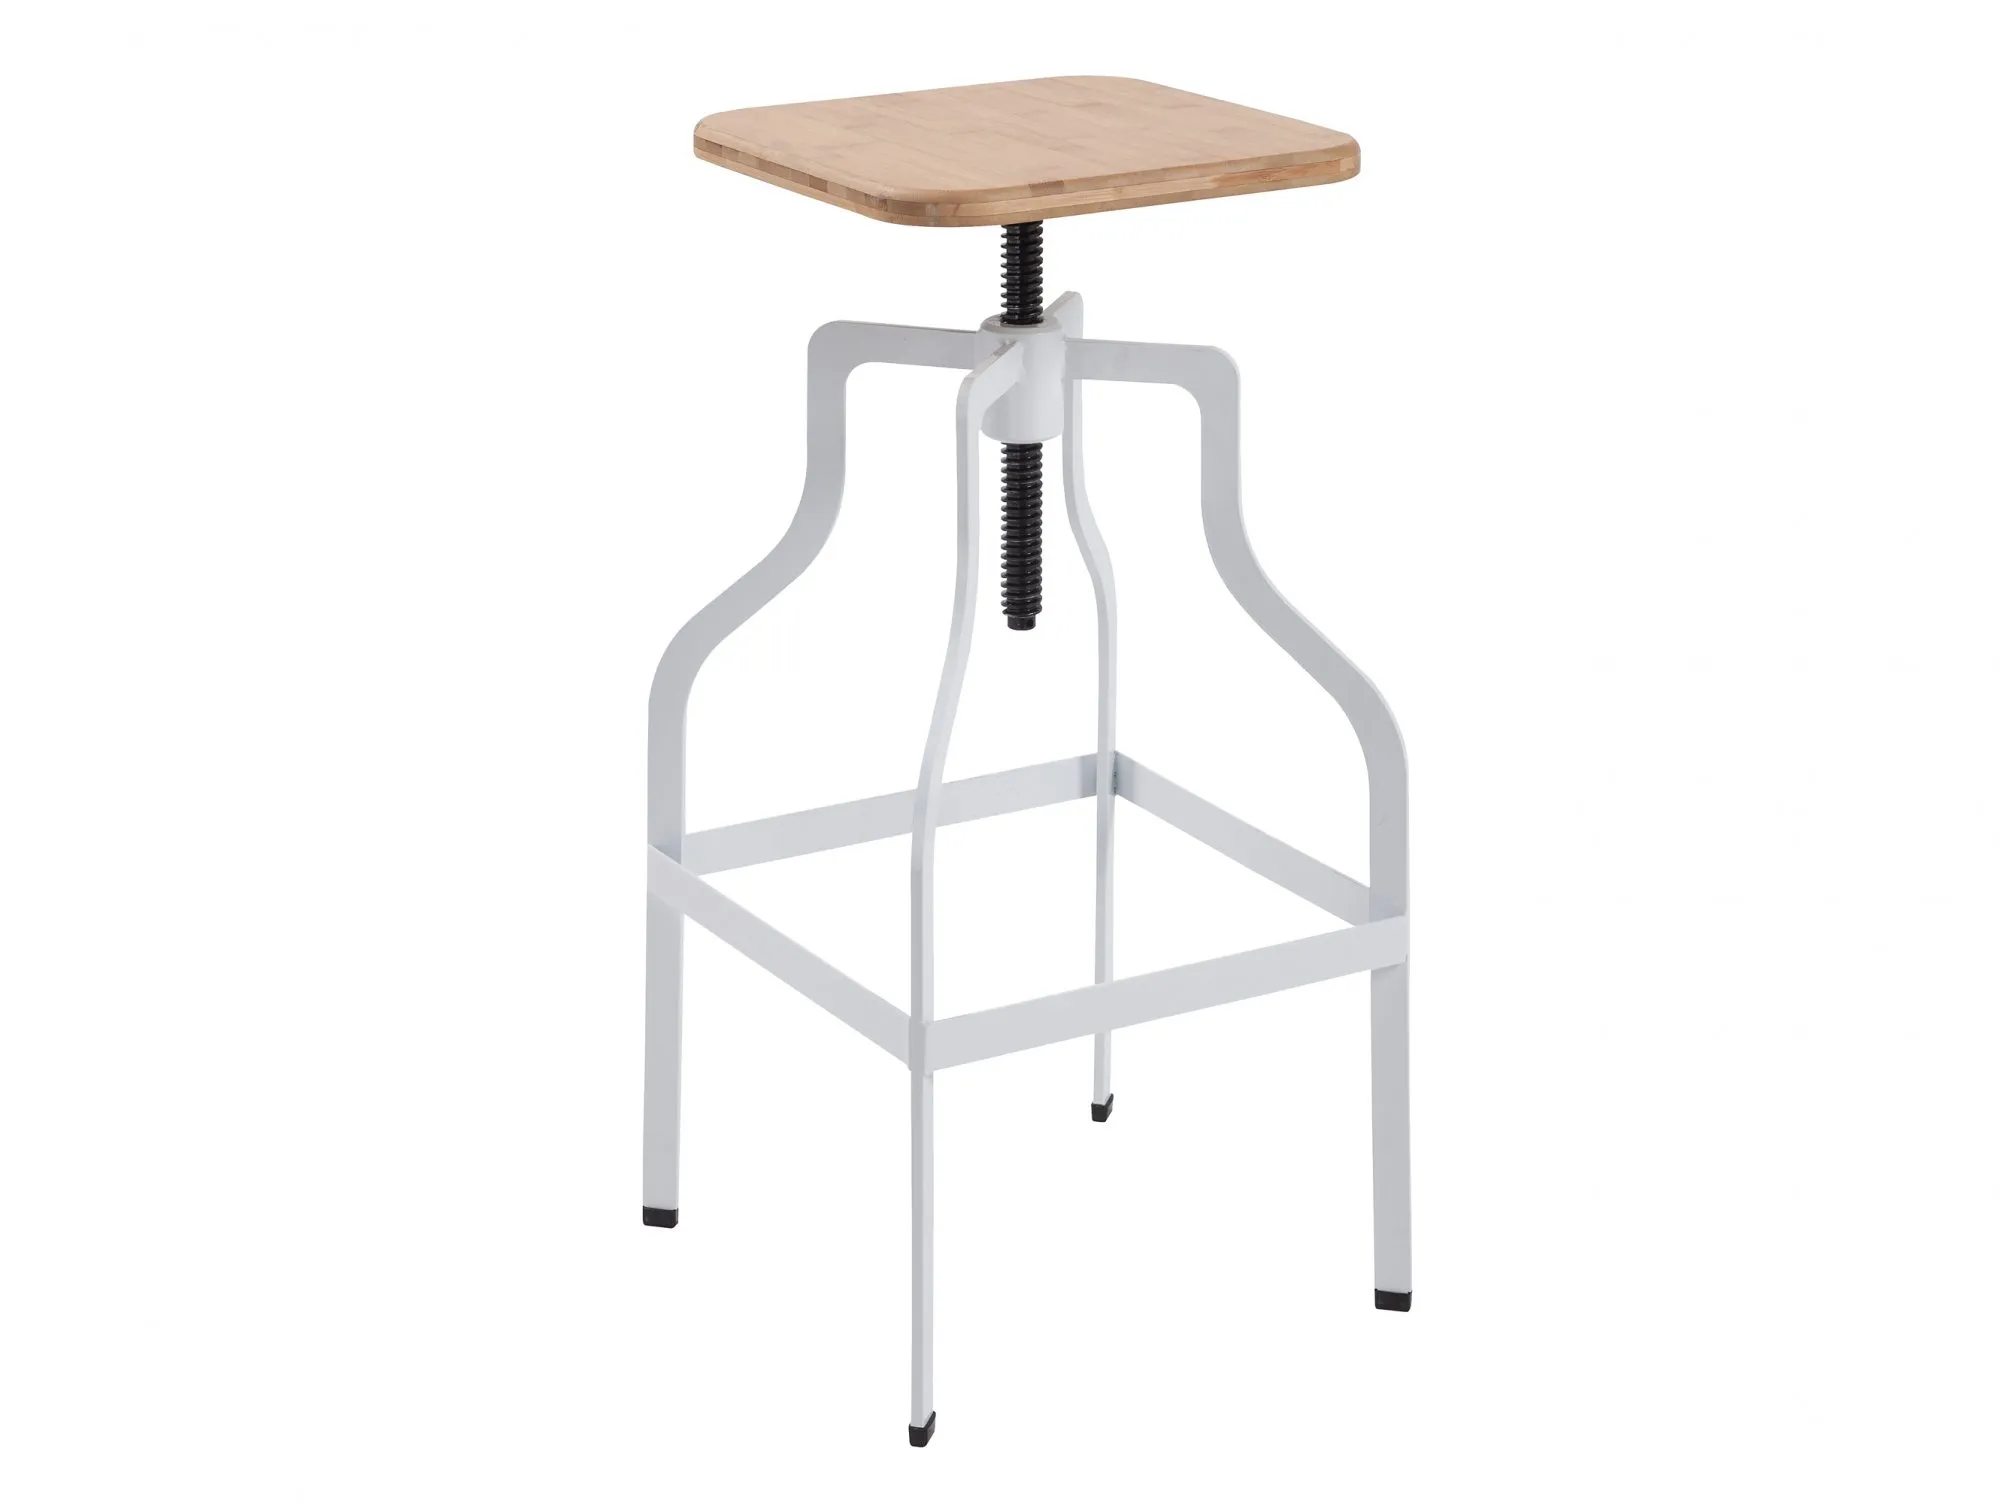 LPD LPD Shoreditch Wood and White Metal Bar Stool